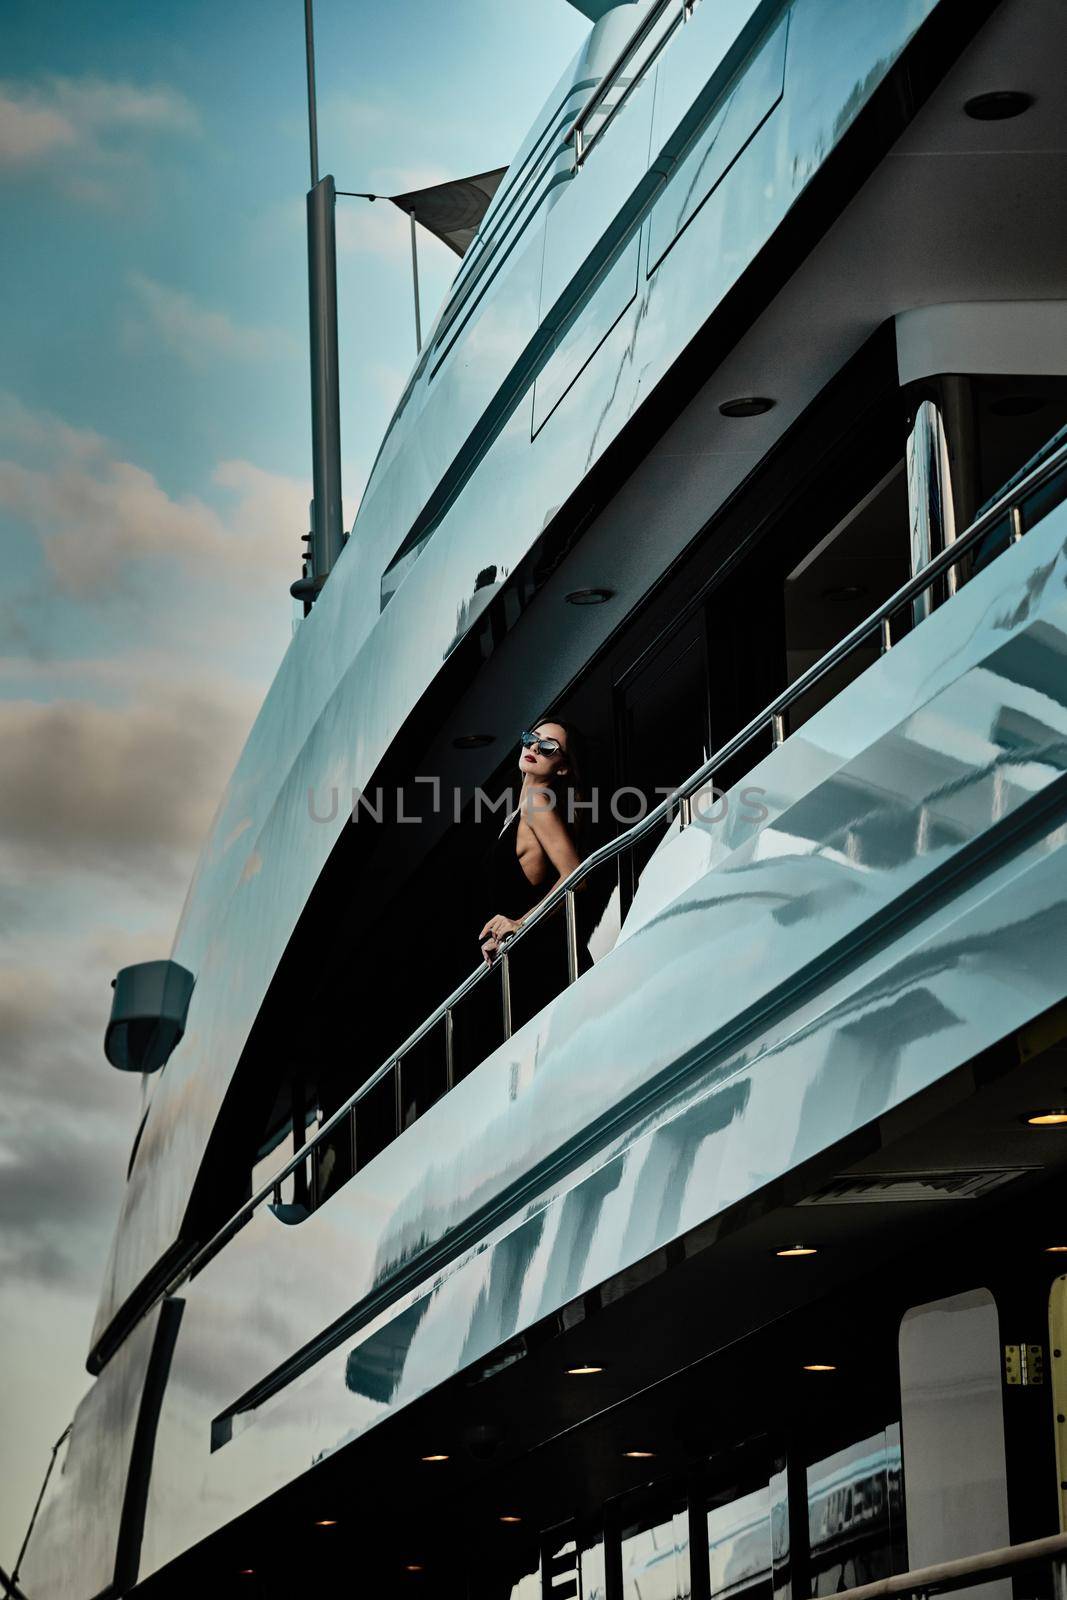 Monaco, Monte-Carlo, 27 September 2019: A glamorous diva in an evening dress of black color and sunglasses stands on the top deck of a huge yacht in anticipation by vladimirdrozdin